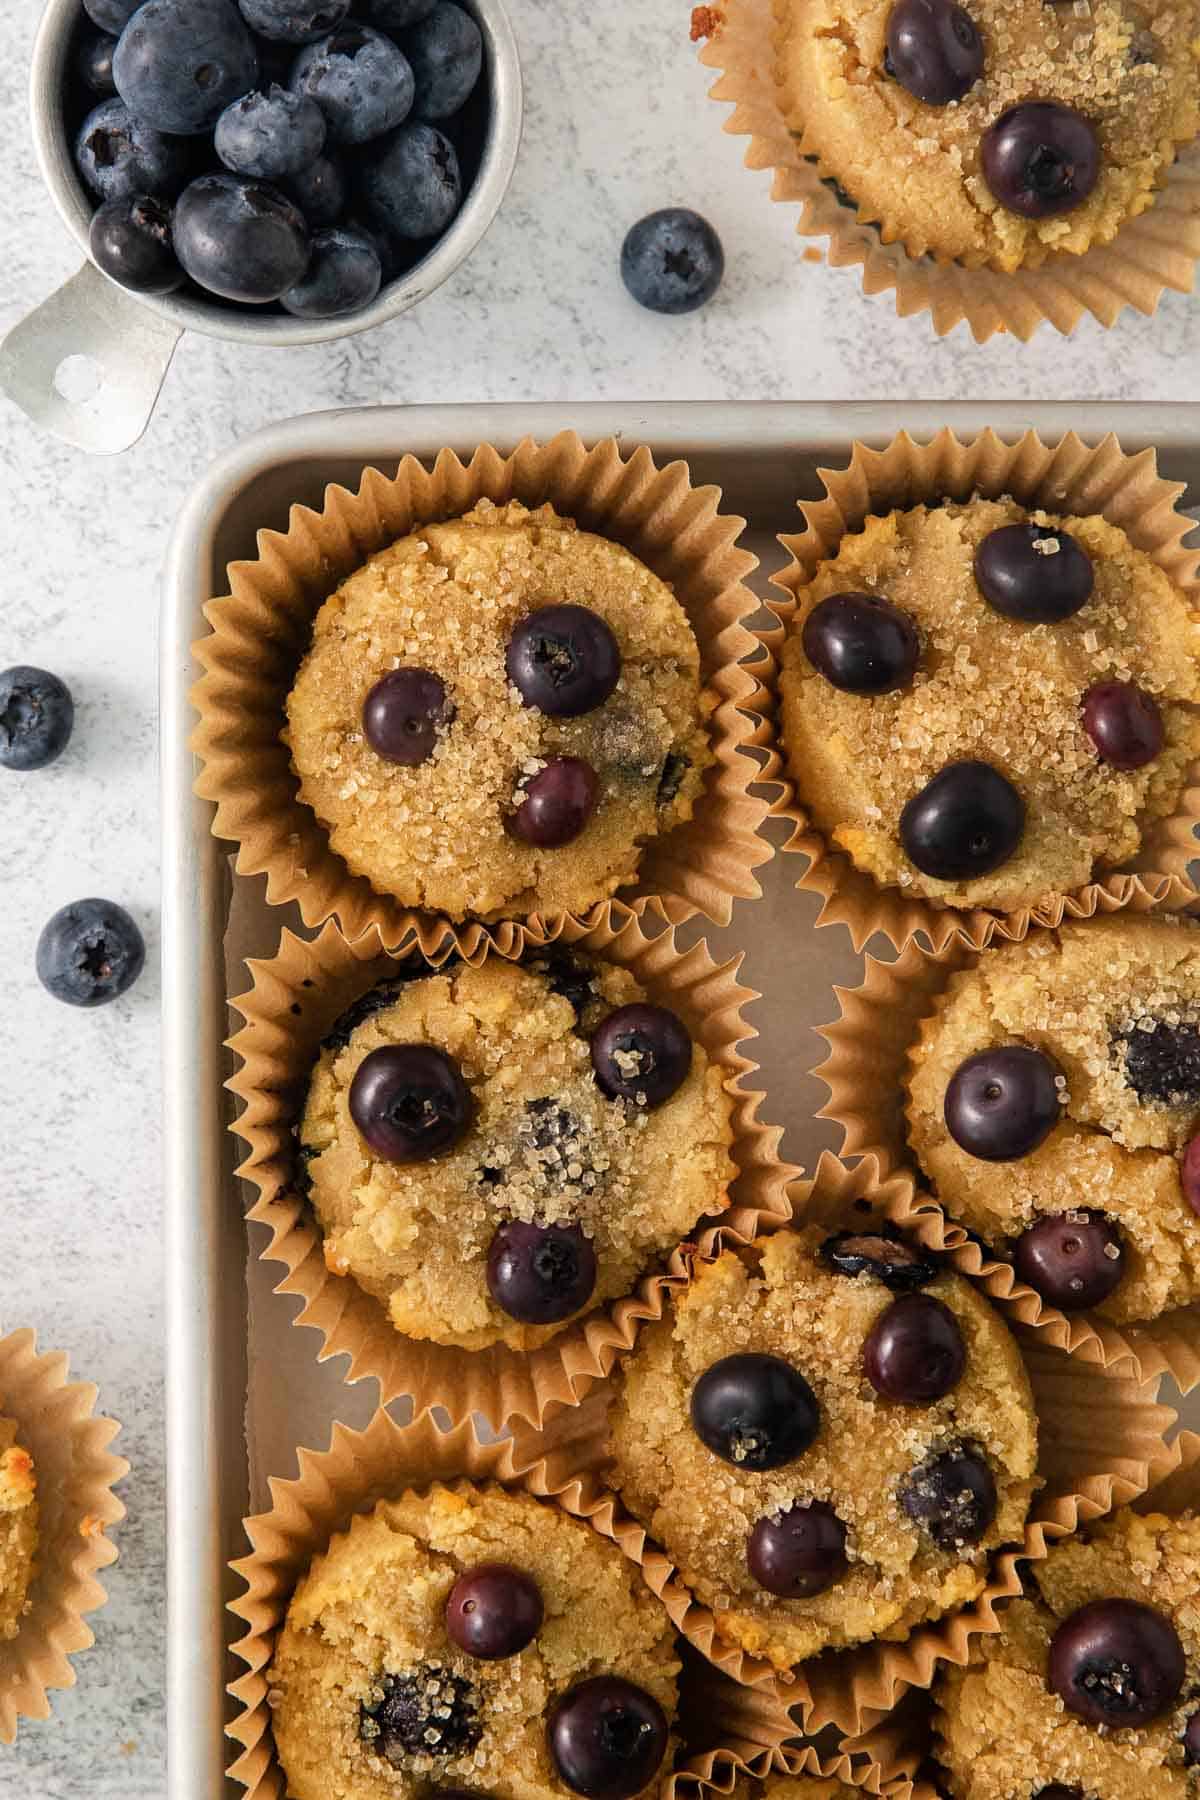 A close-up photo of coconut flour blueberry muffins in a baking dish